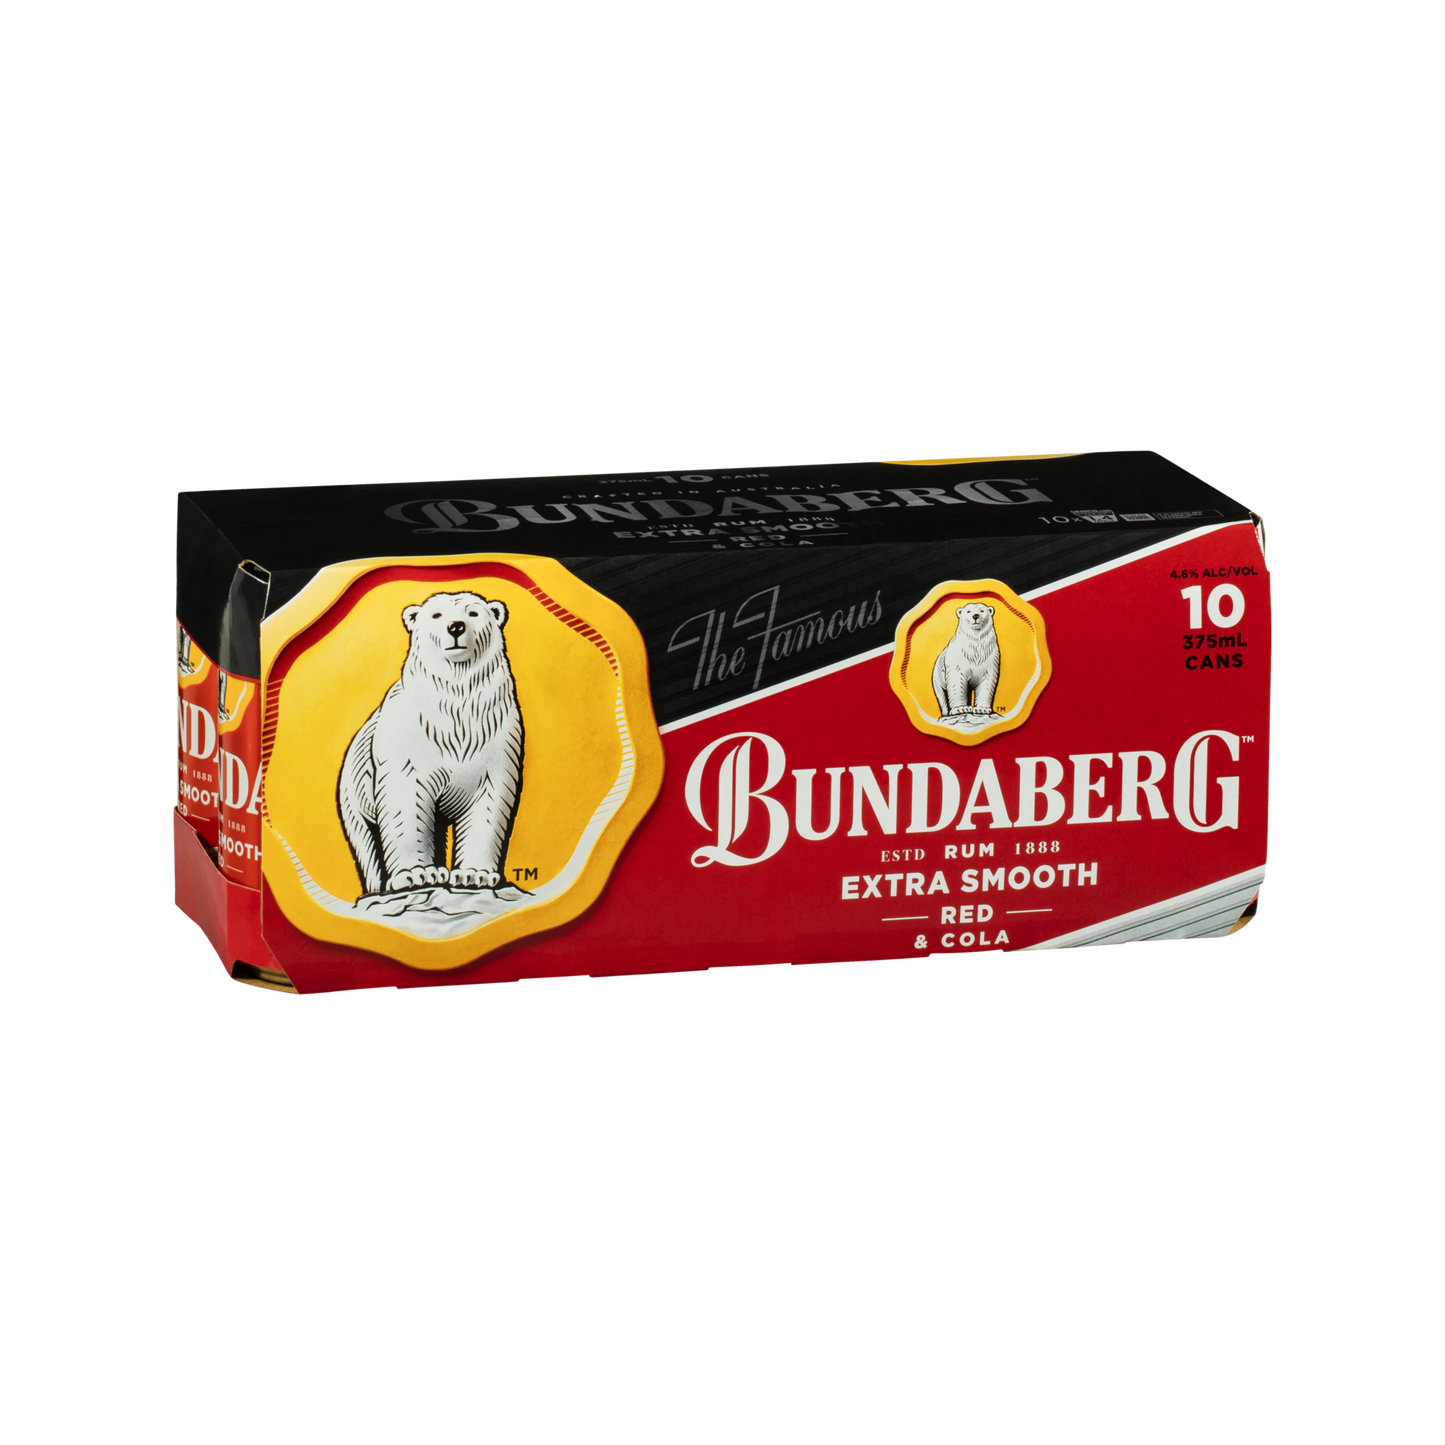 Bundaberg Red Rum and Cola Cans 375ml